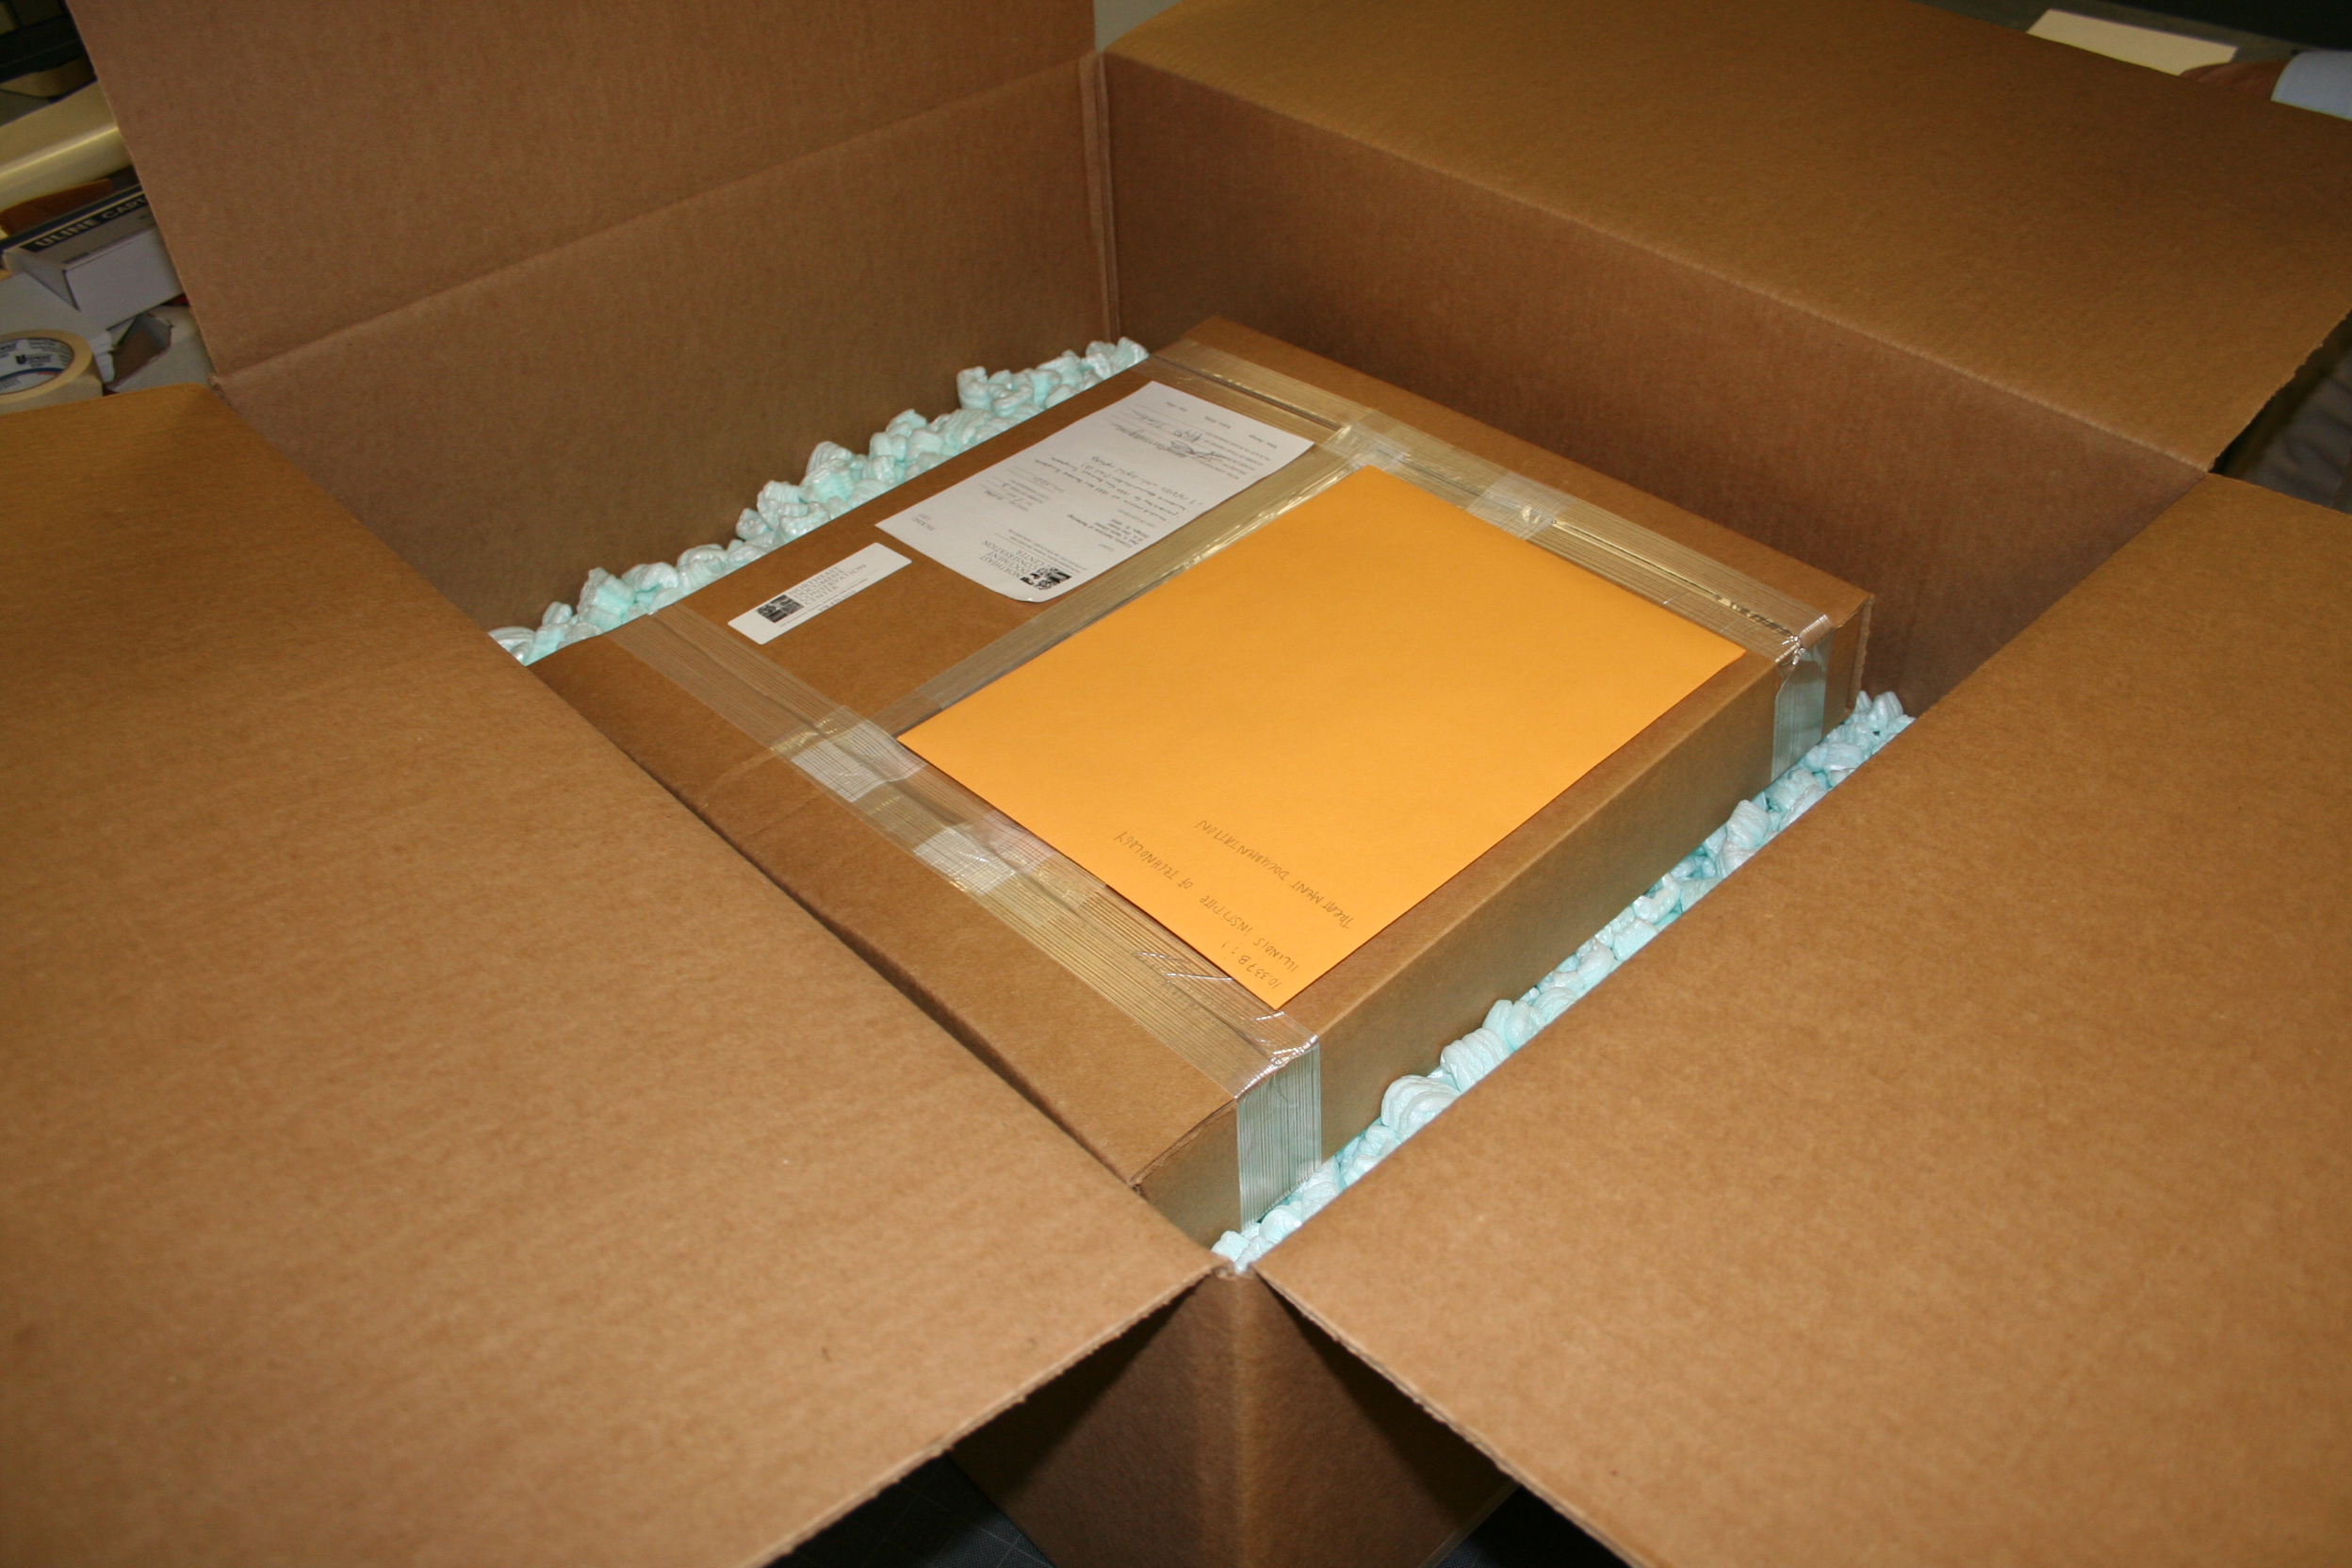 4.5 Packing and Shipping Paper Artifacts — NEDCC